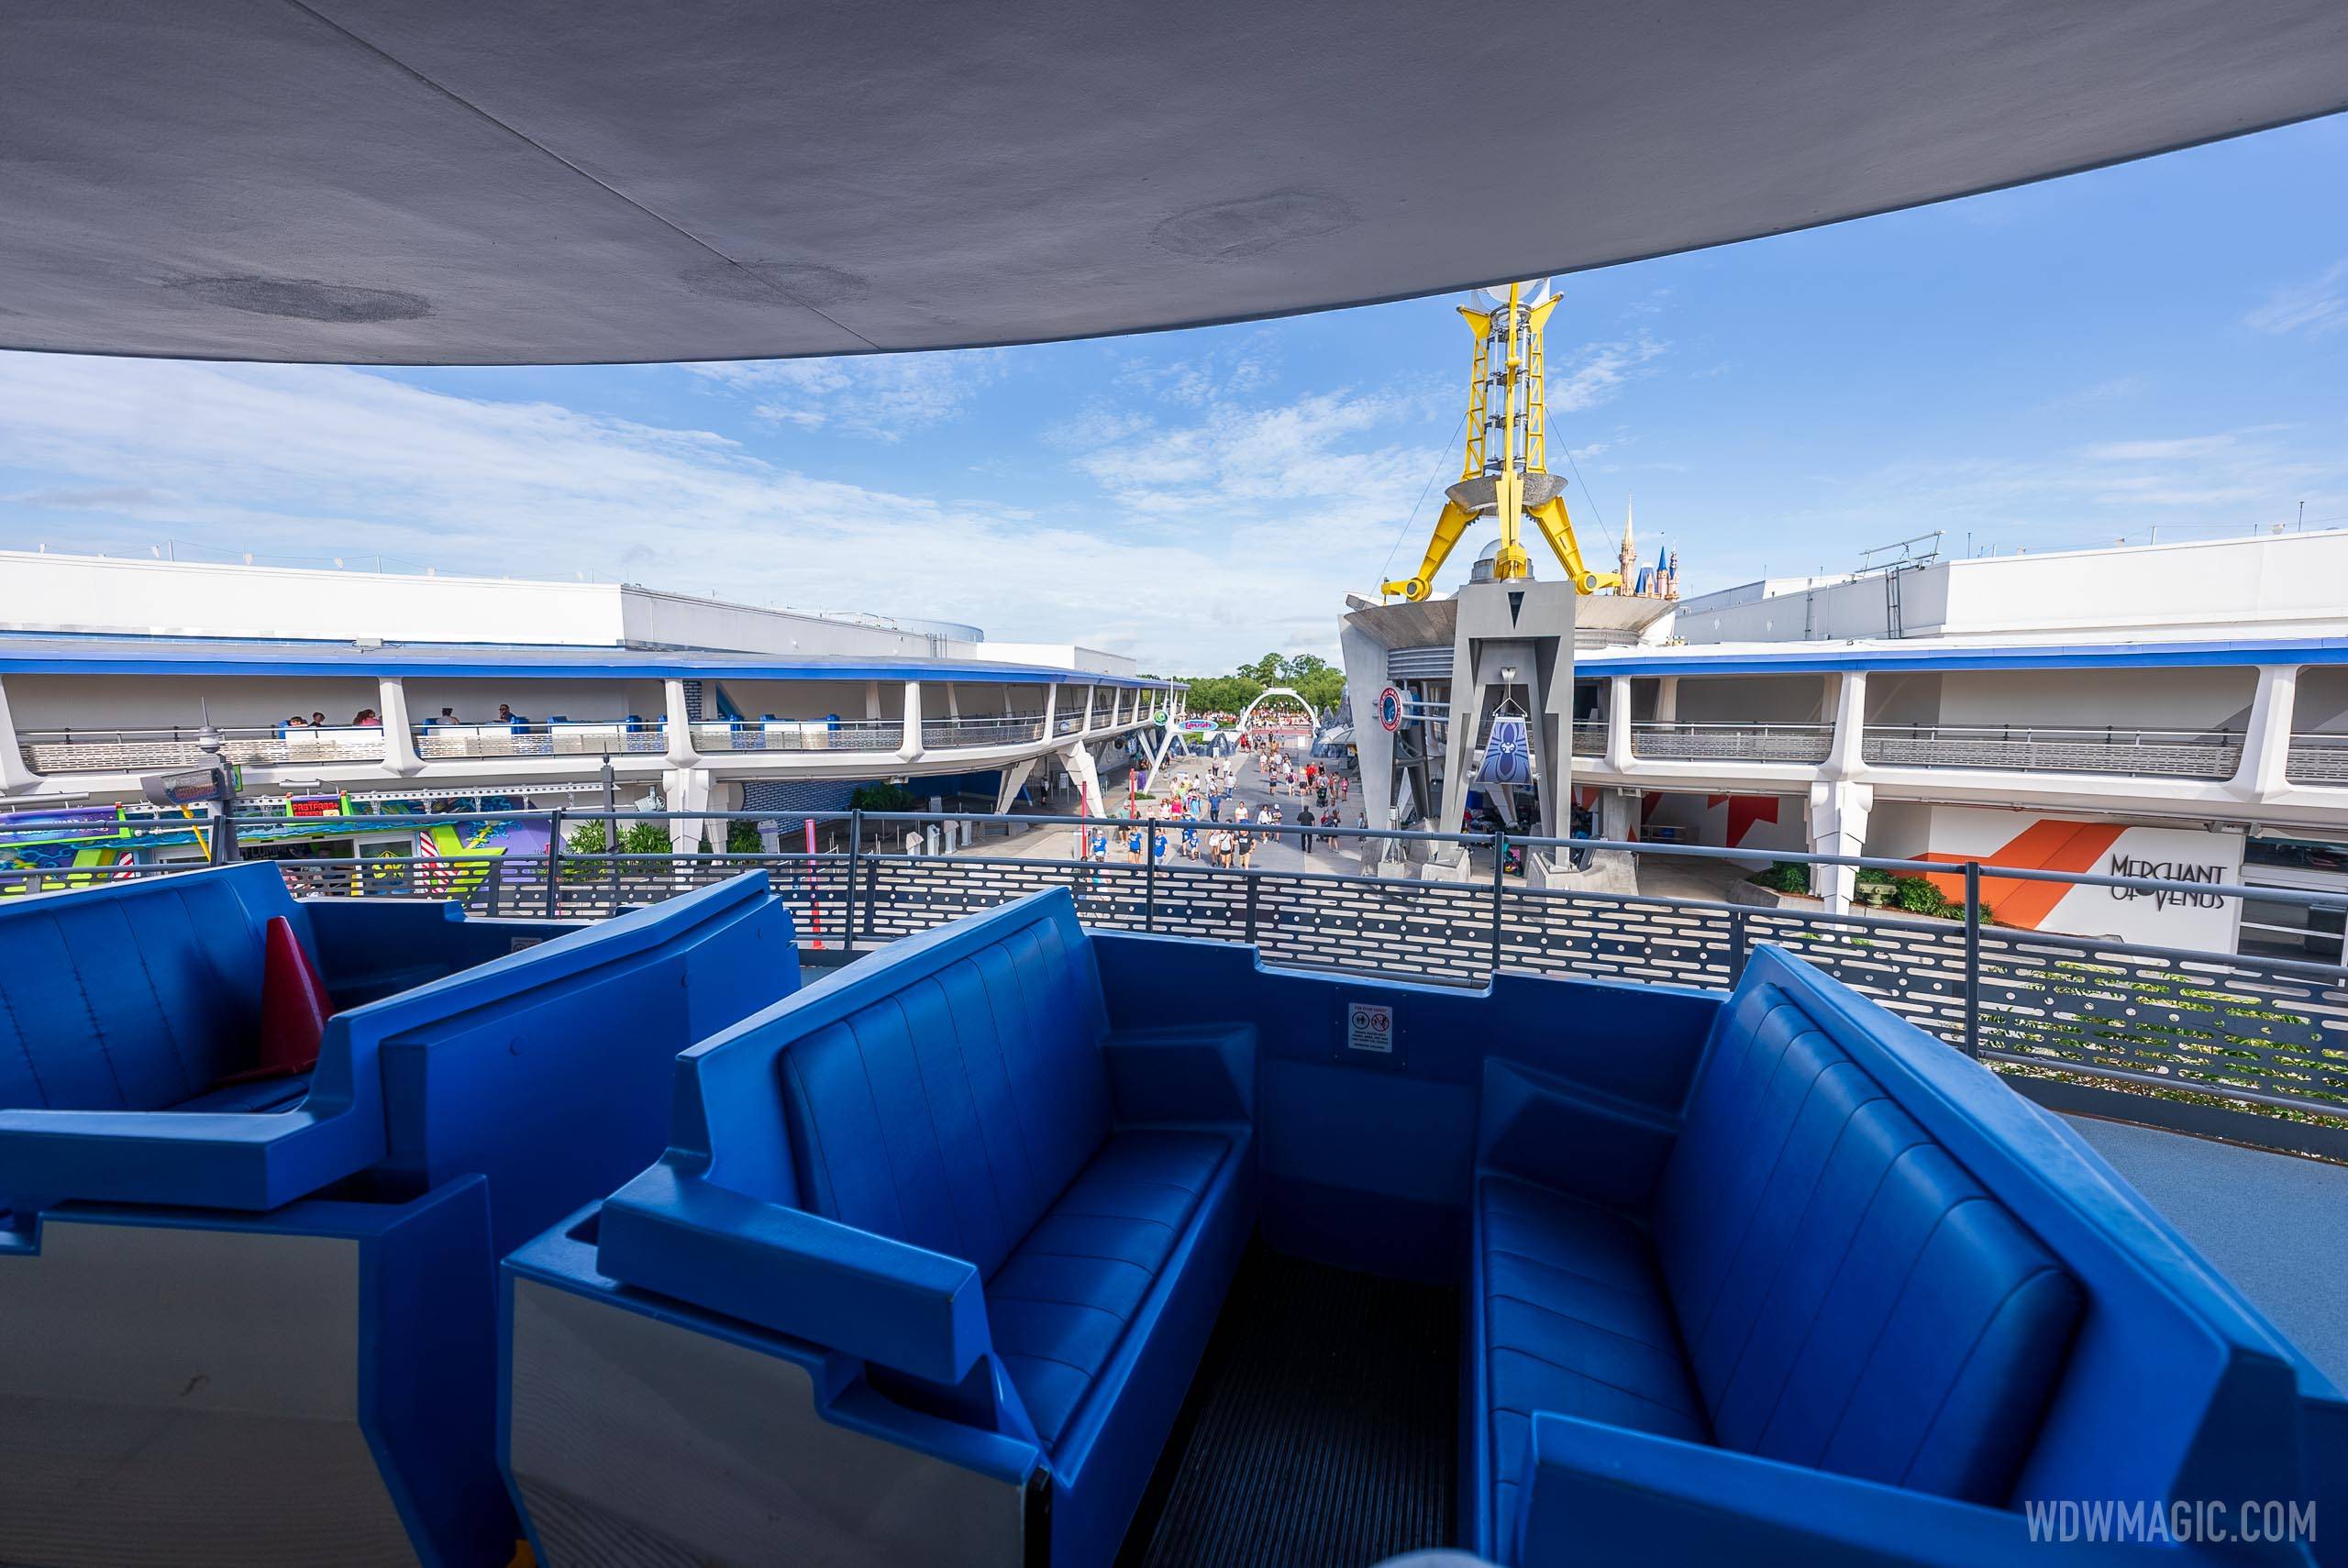 Tomorrowland Transit Authority reopens after refurbishment